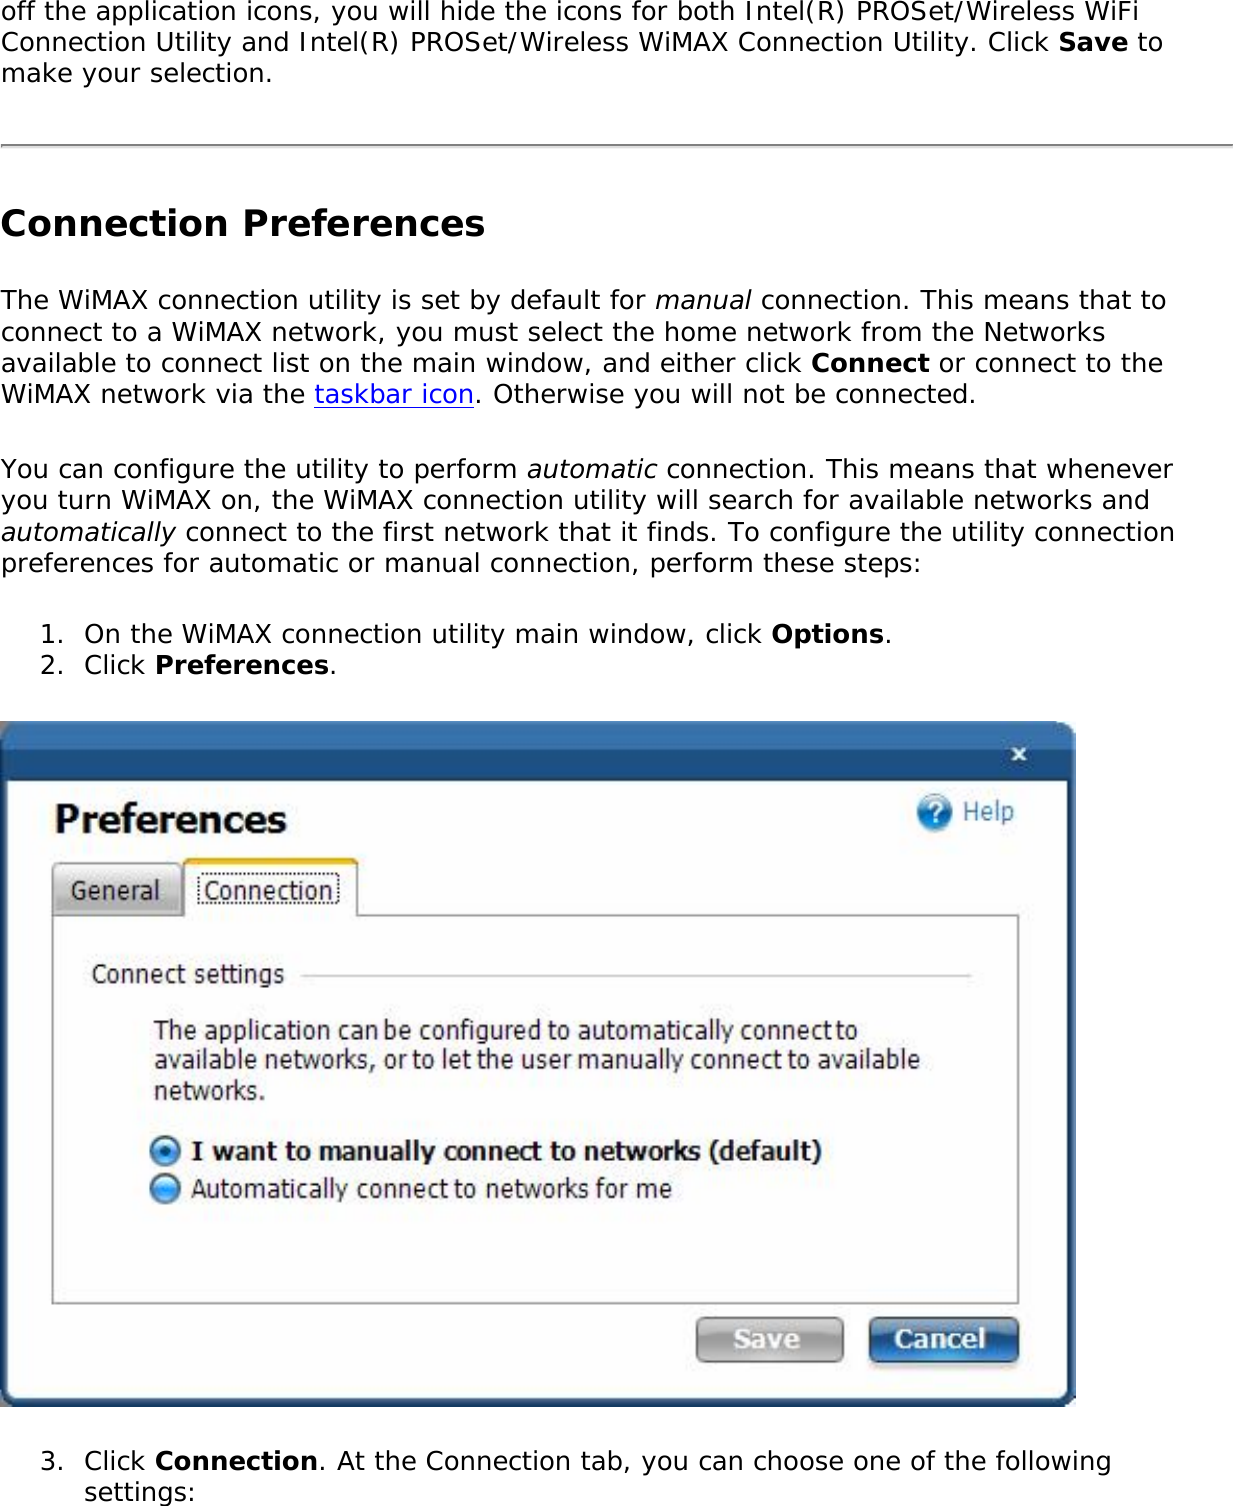 off the application icons, you will hide the icons for both Intel(R) PROSet/Wireless WiFi Connection Utility and Intel(R) PROSet/Wireless WiMAX Connection Utility. Click Save to make your selection.Connection PreferencesThe WiMAX connection utility is set by default for manual connection. This means that to connect to a WiMAX network, you must select the home network from the Networks available to connect list on the main window, and either click Connect or connect to the WiMAX network via the taskbar icon. Otherwise you will not be connected. You can configure the utility to perform automatic connection. This means that whenever you turn WiMAX on, the WiMAX connection utility will search for available networks and automatically connect to the first network that it finds. To configure the utility connection preferences for automatic or manual connection, perform these steps: 1.  On the WiMAX connection utility main window, click Options.2.  Click Preferences.3.  Click Connection. At the Connection tab, you can choose one of the following settings: 